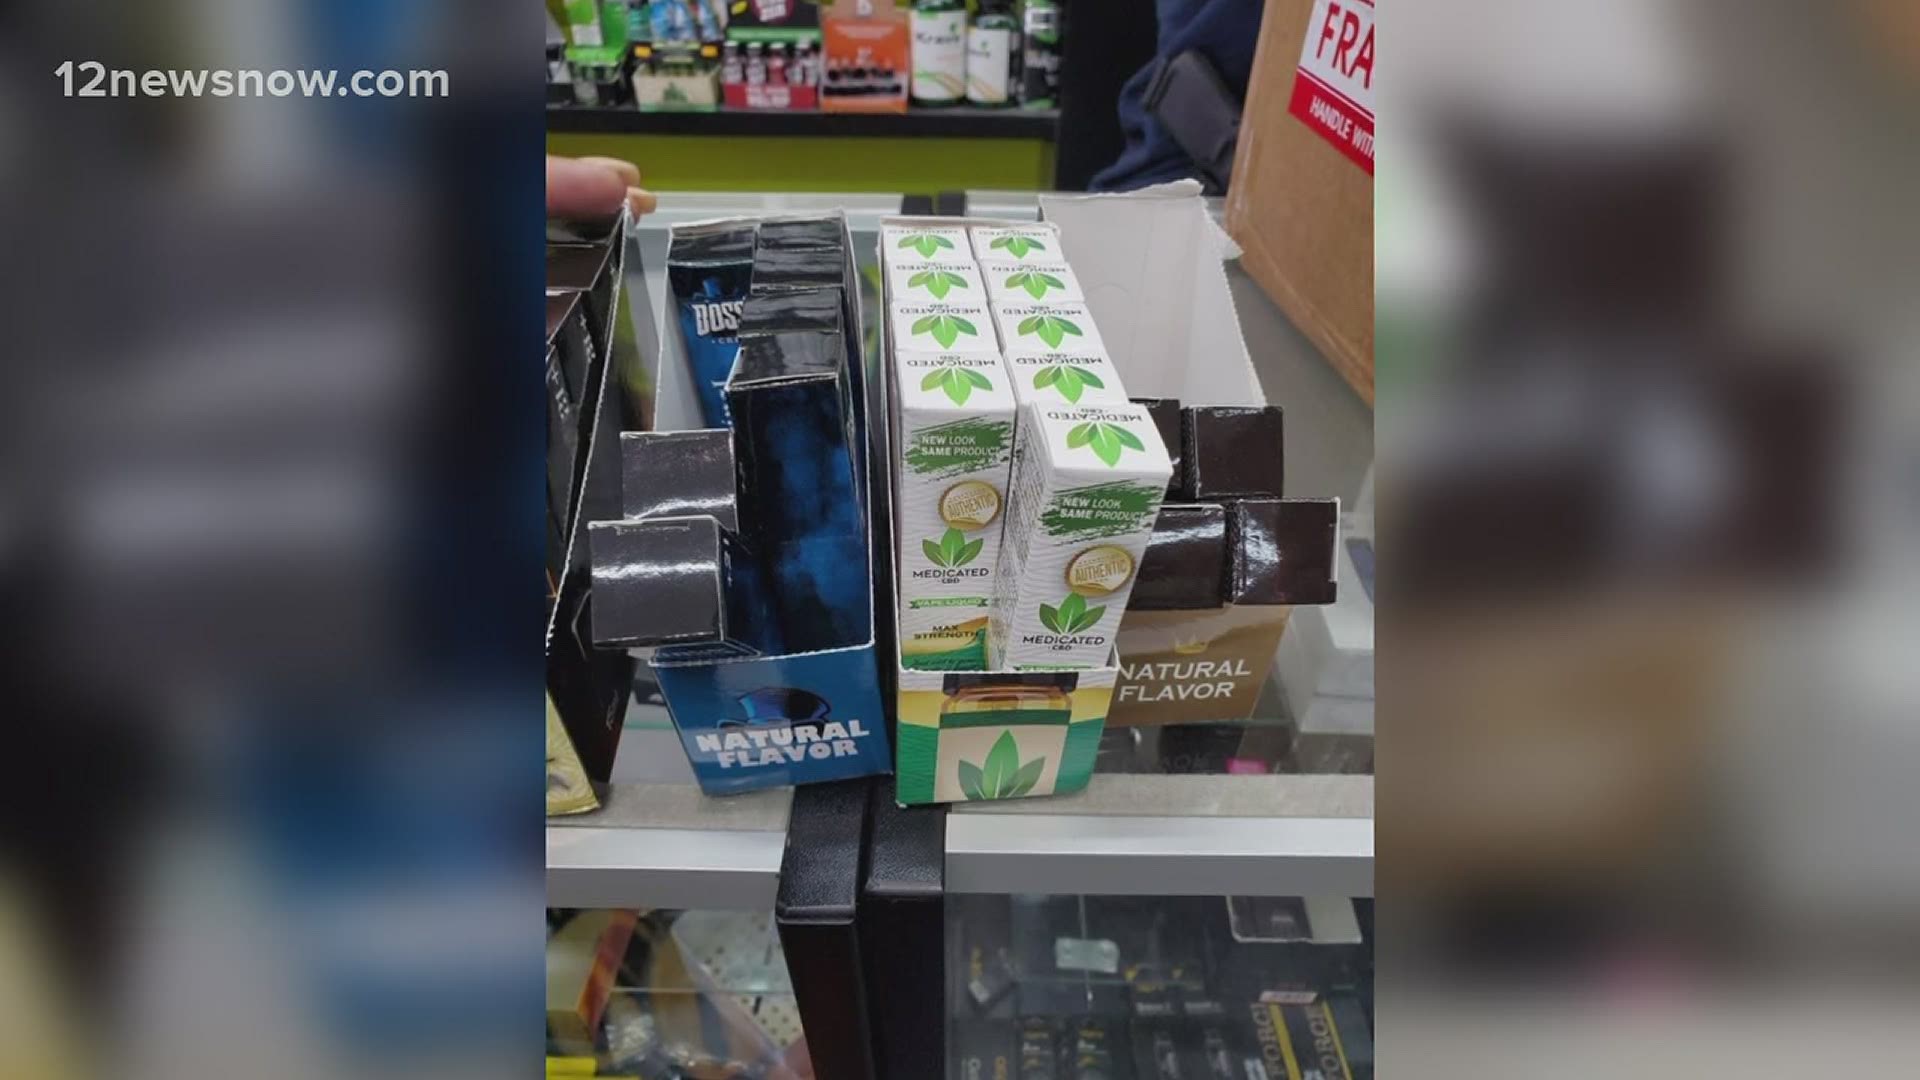 The Jefferson County Sheriff's Narcotics Task Force said they found more than 150 bottles of a "dangerous synthetic" CBD oil at Smokee's vape shop.